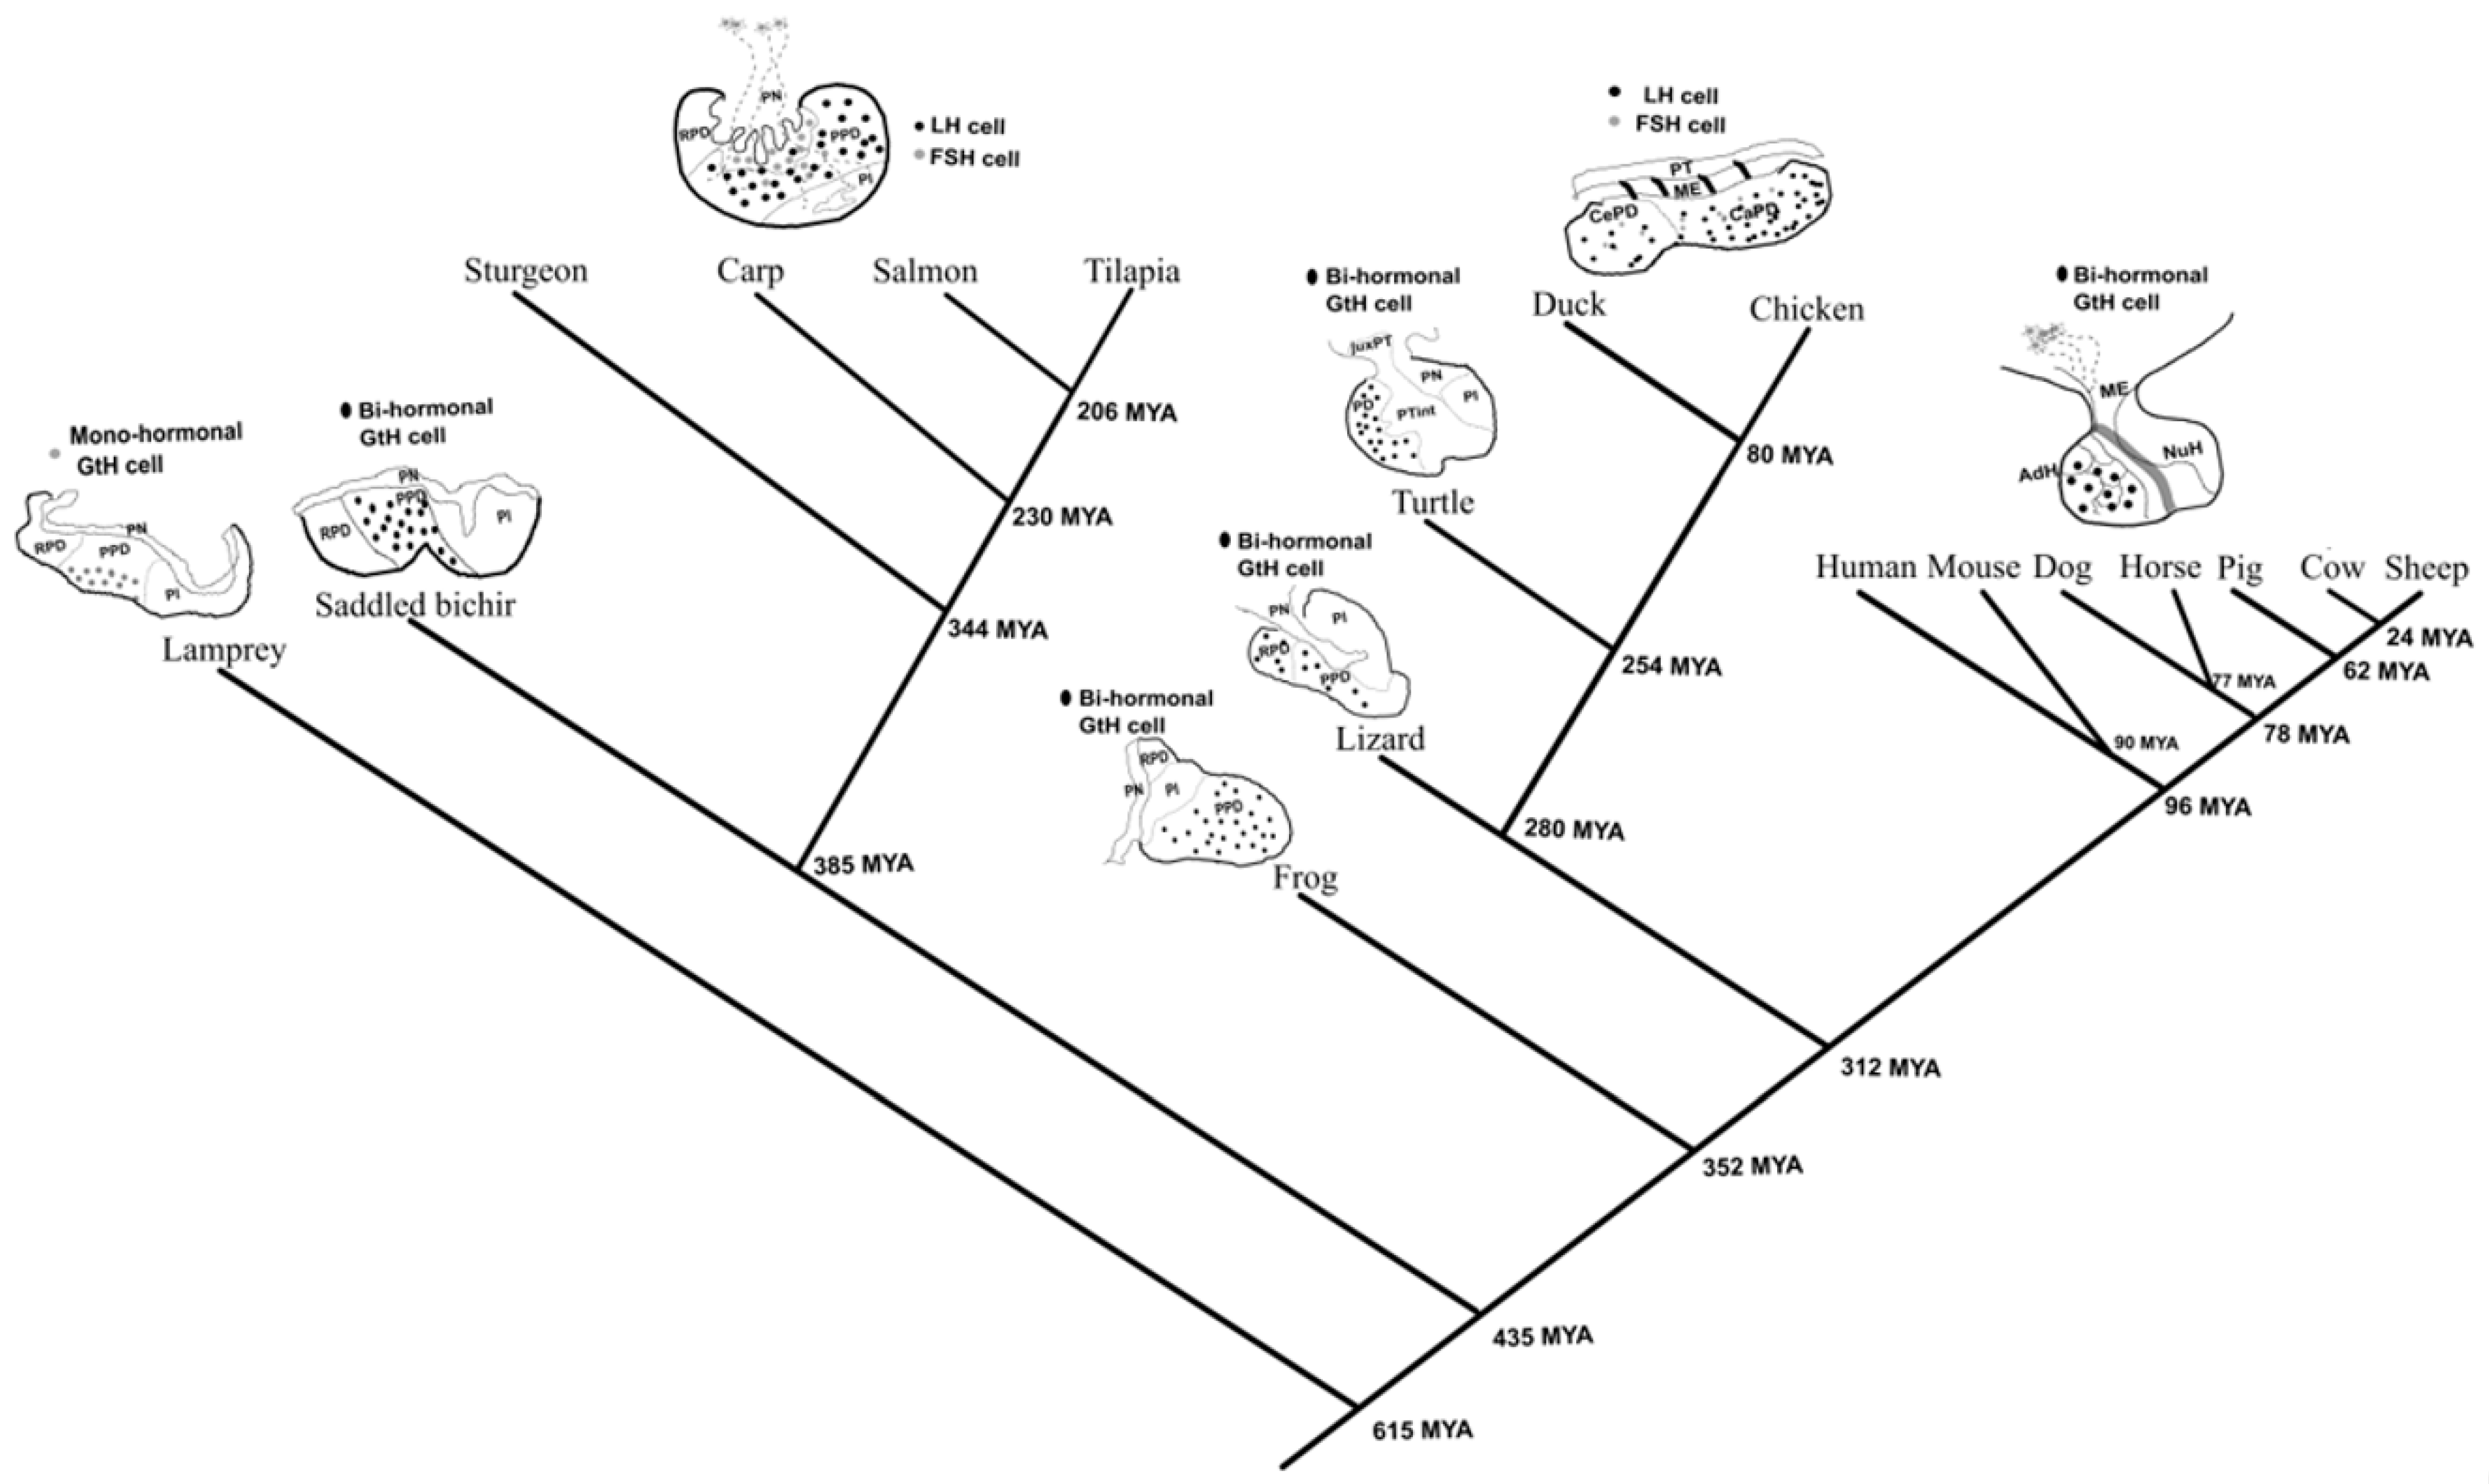 Vertebrate leptin phylogeny. Fish and mammals share a common